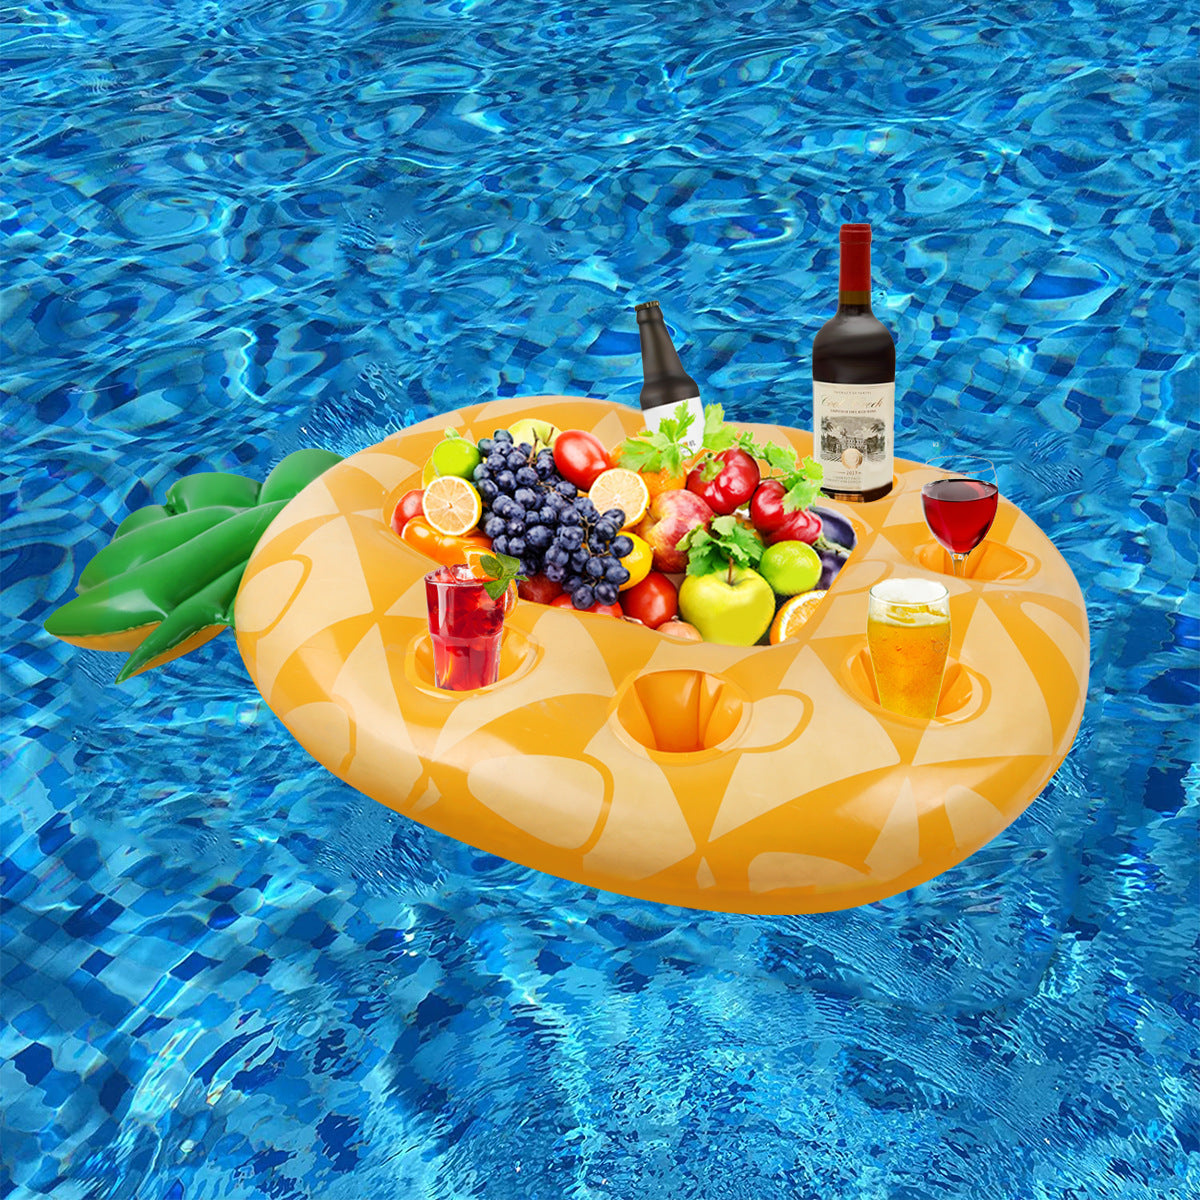 inflatable-cup-holder-pineapple-drink-holder-swimming-pool-float-bathing-pool-toy-party-decoration-bar-coasters